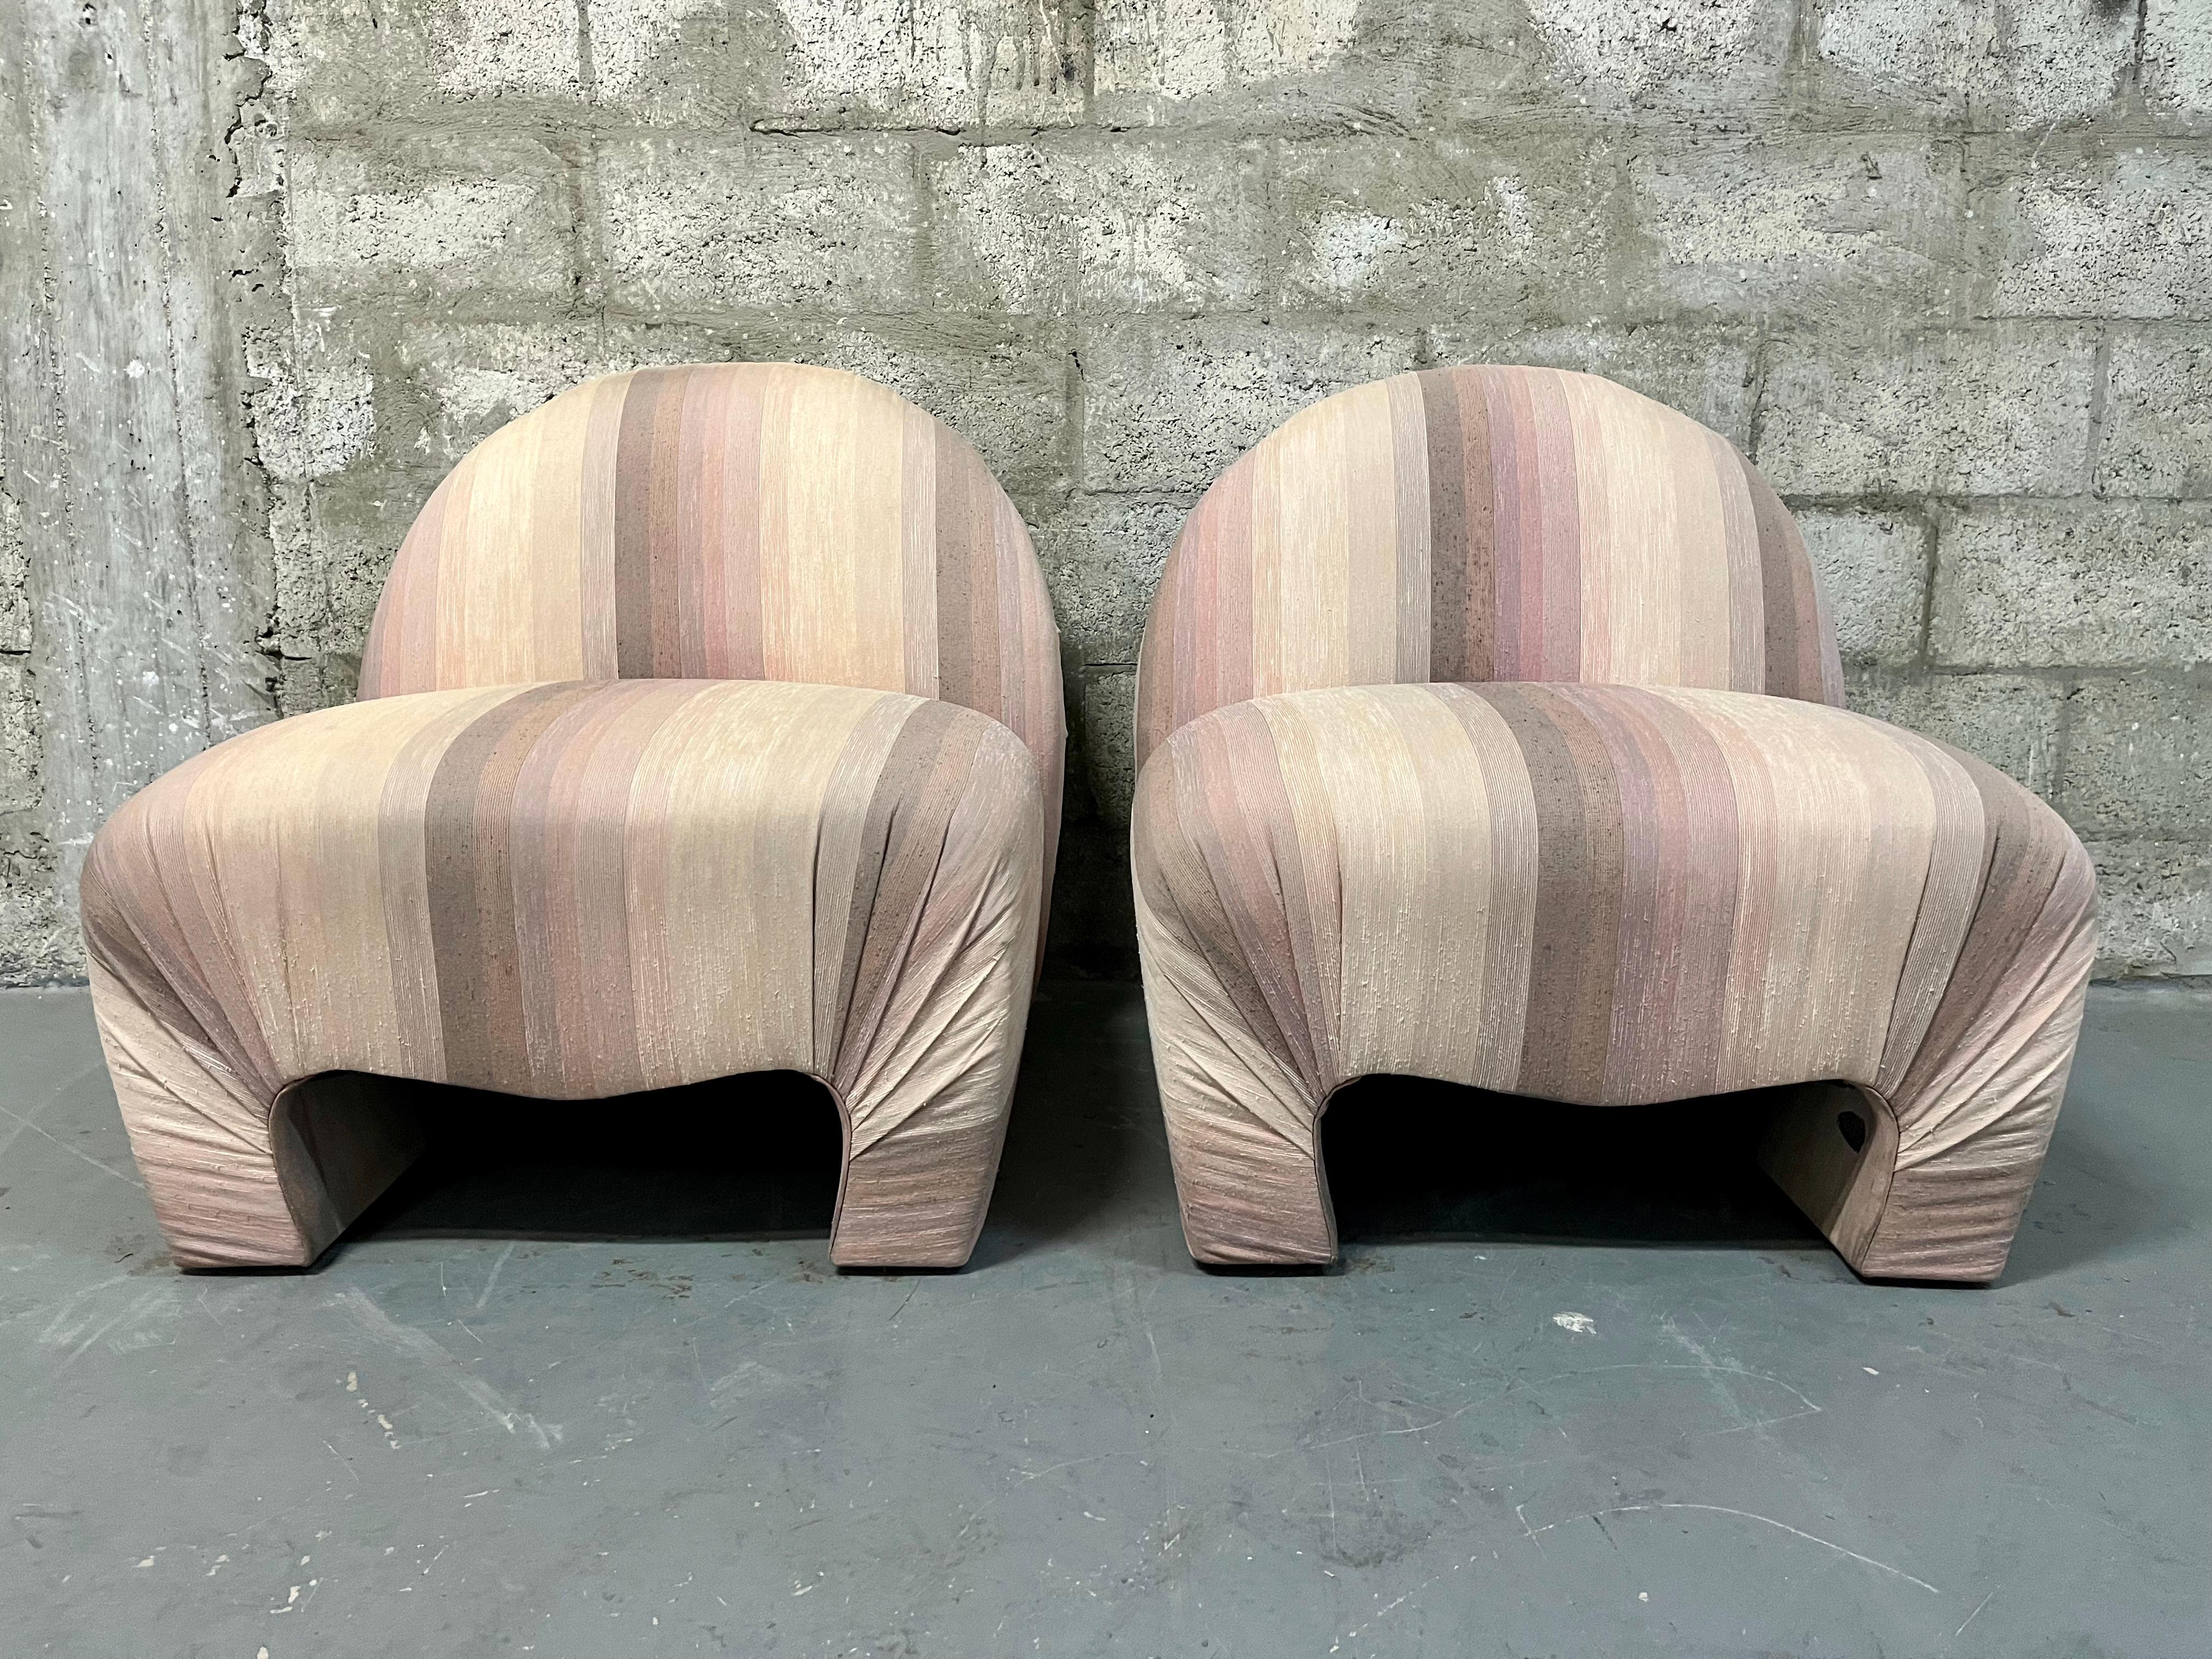 A Pair of Upholstered Lounge Chairs in the Vladimir Kagan for Weiman Furniture Style. Circa 1980s
Feature a post modern low-level living profile with soft curved lines, rounded edge, and the original striped upholstery in cream, lilac, peach, tan,